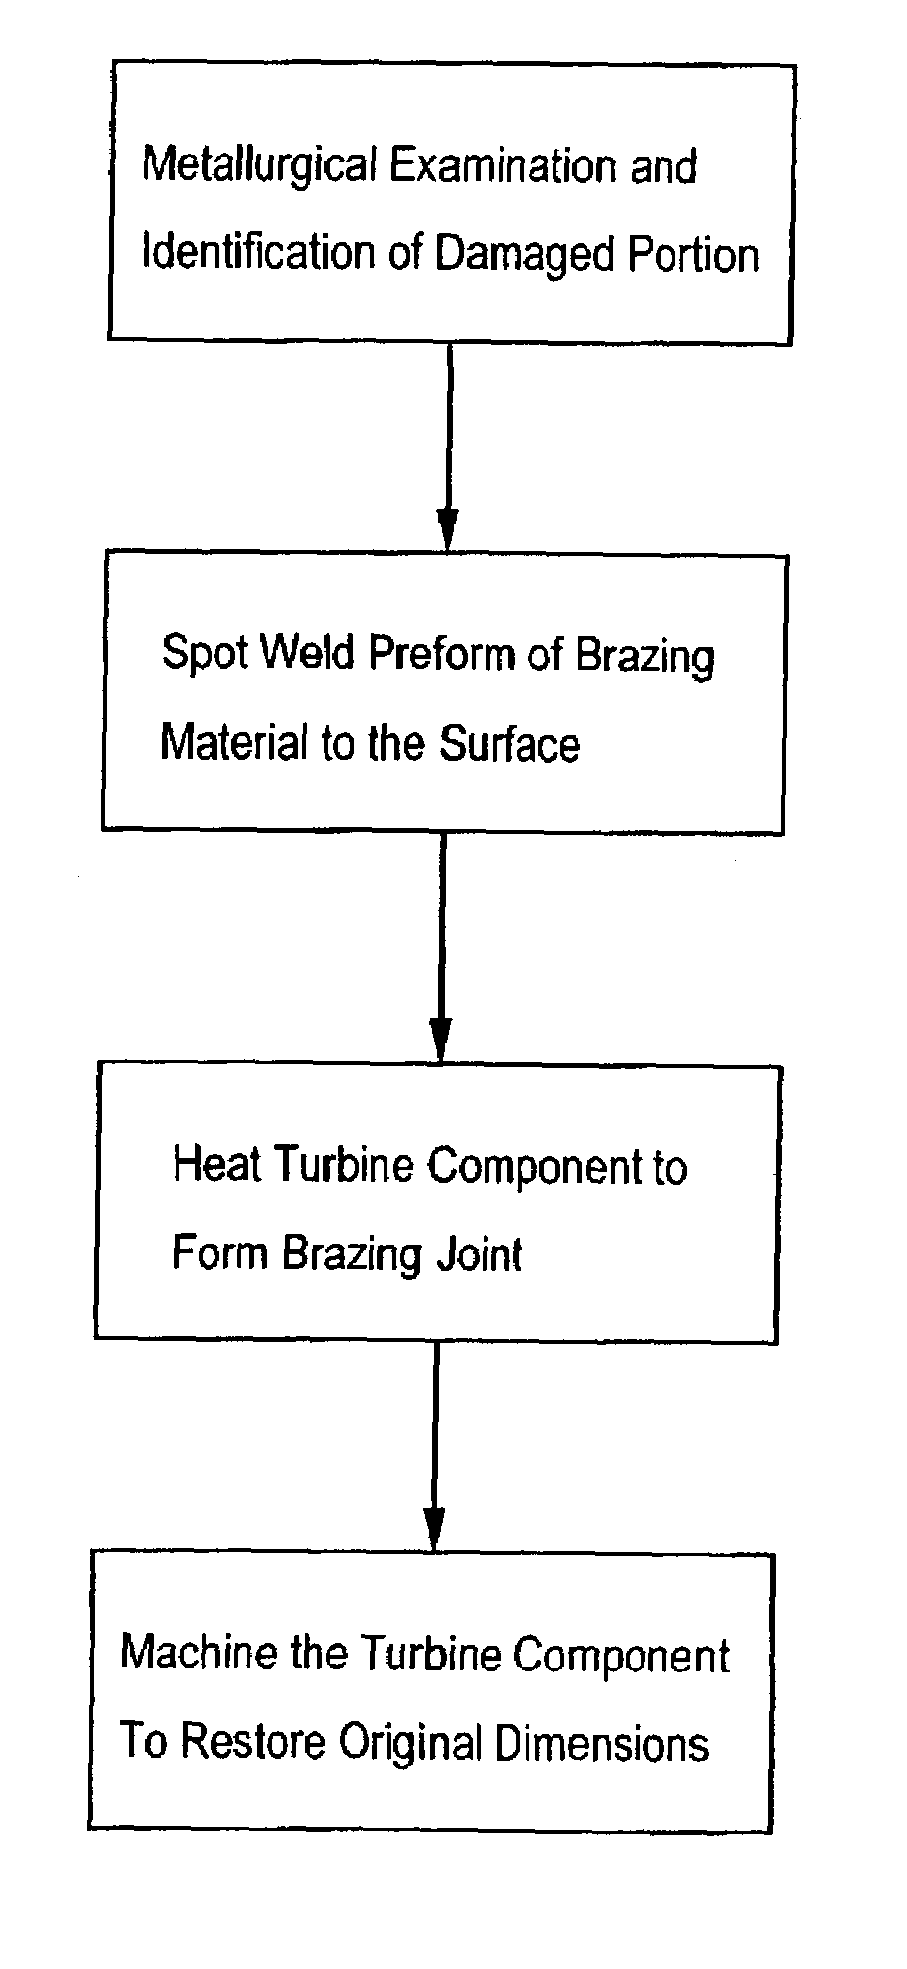 Process for repairing turbine components